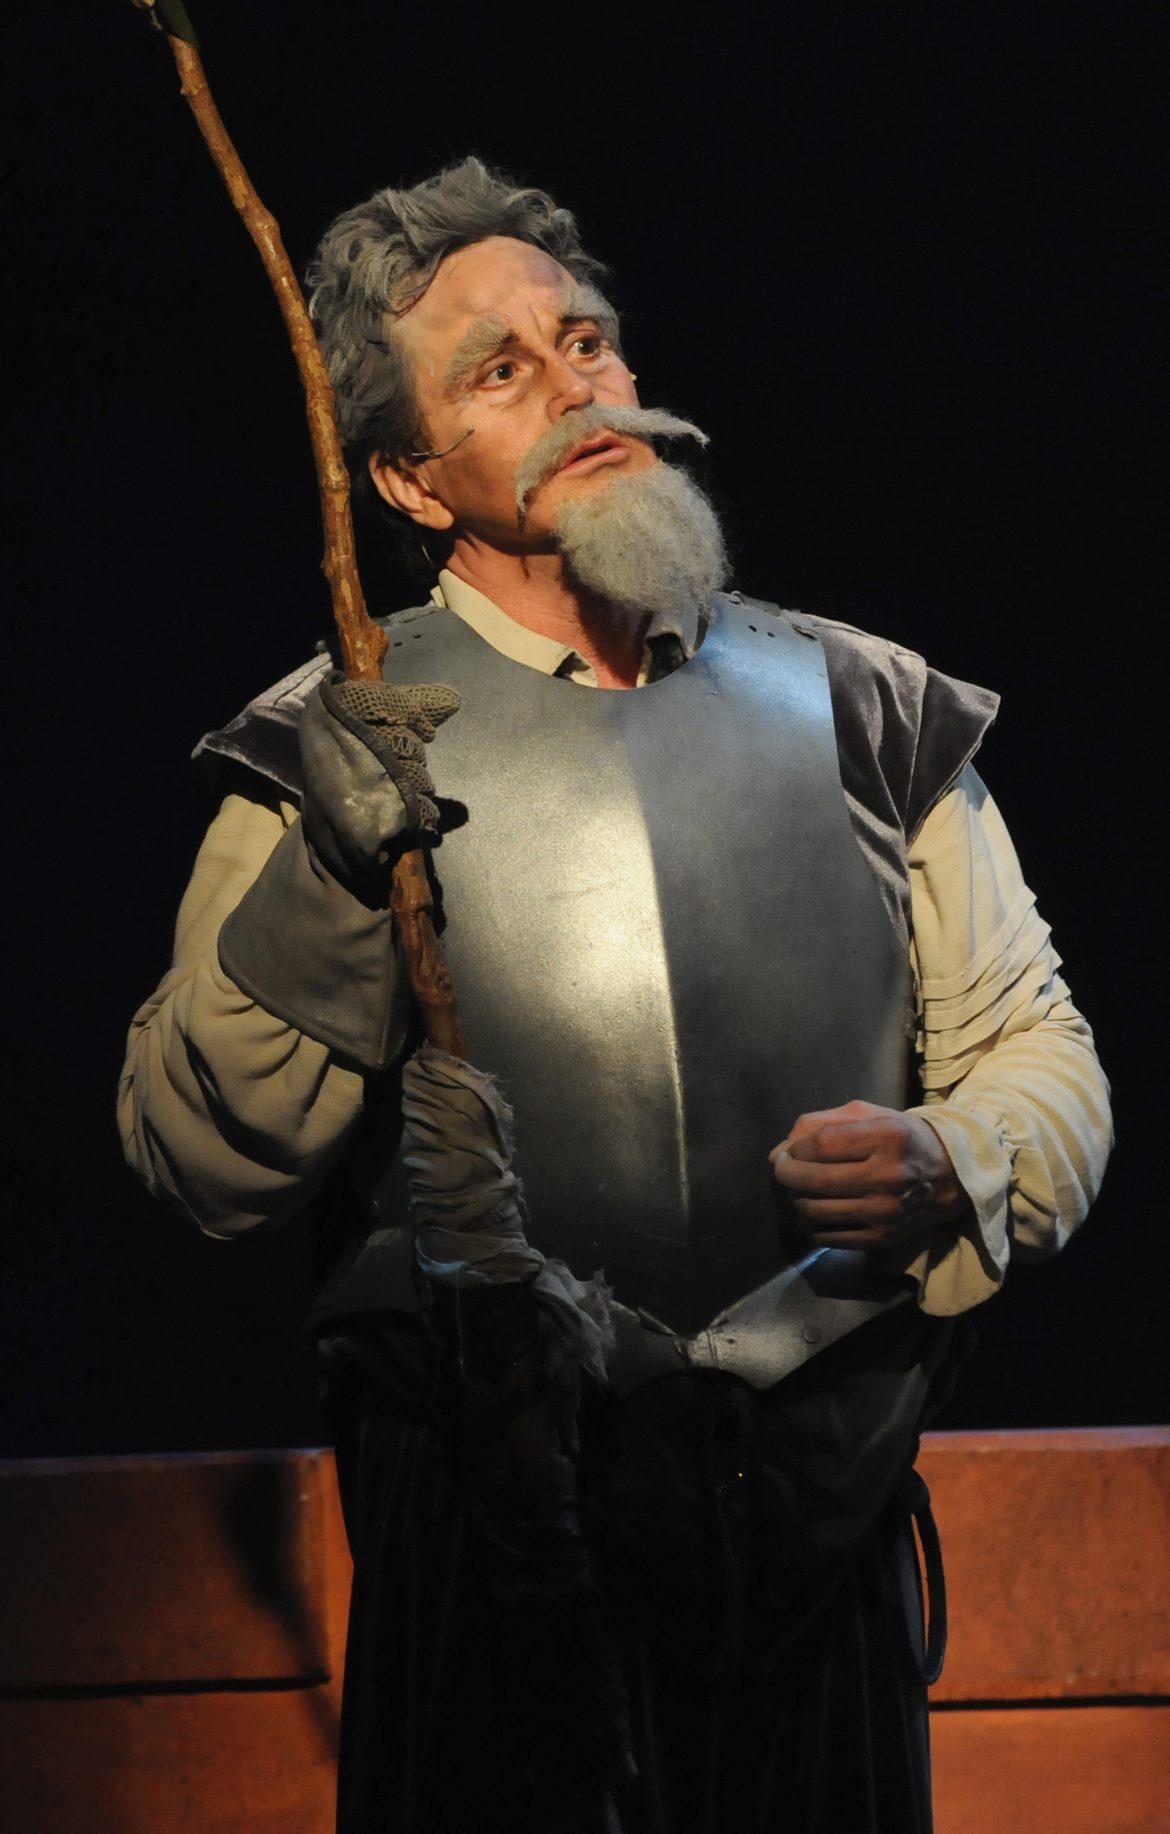 Man+wears+armor+along+with+some+fake+facial+hair+to+play+Don+Quixote